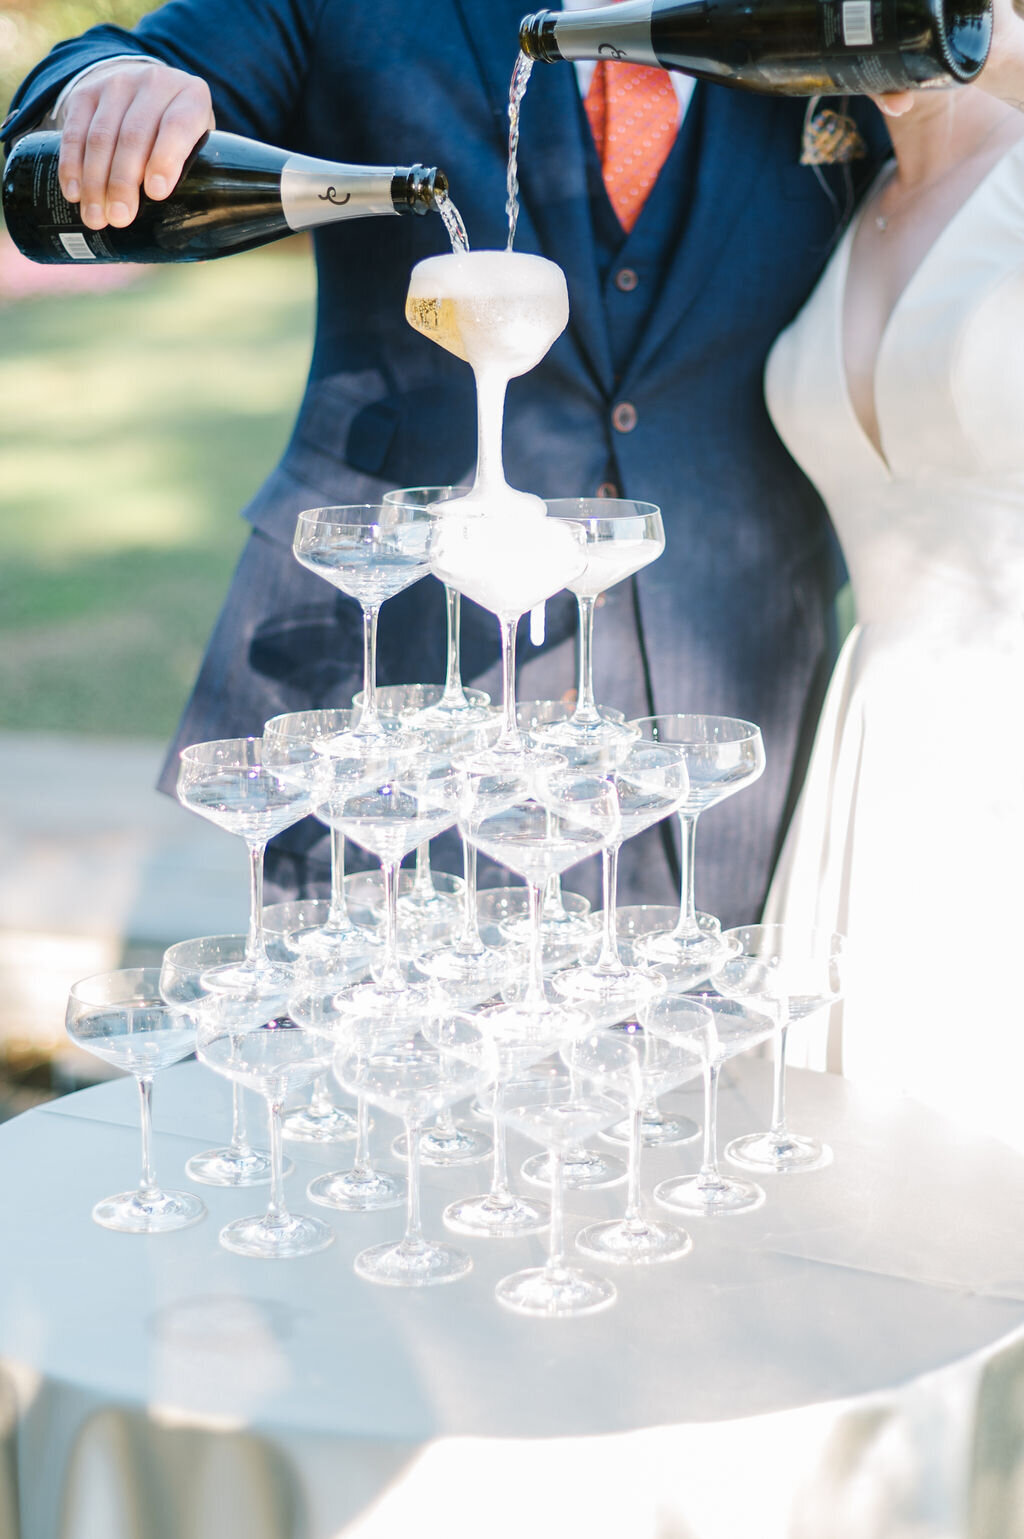 Wine glass tower with wine being poured by the couple